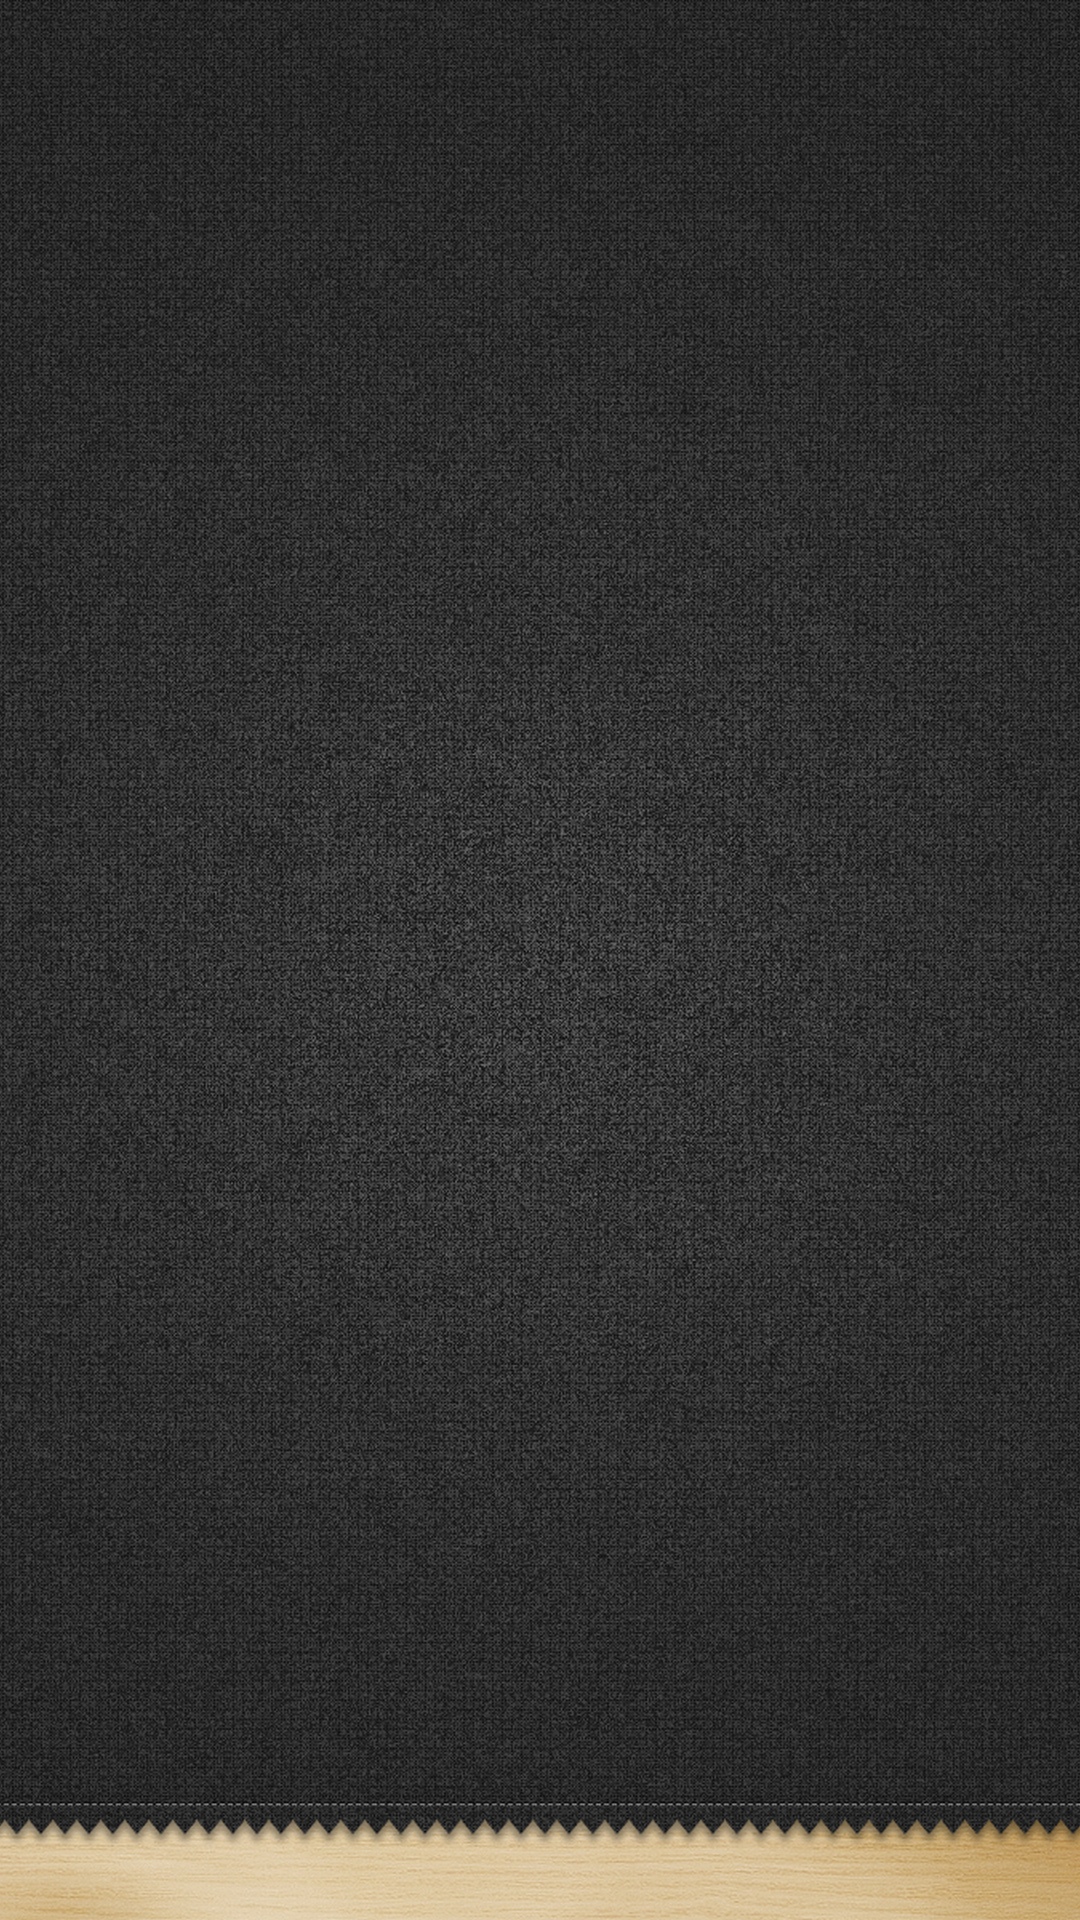 Wallpaper for galaxy s4 with gray fabric texture design in 1080x1920 resolution